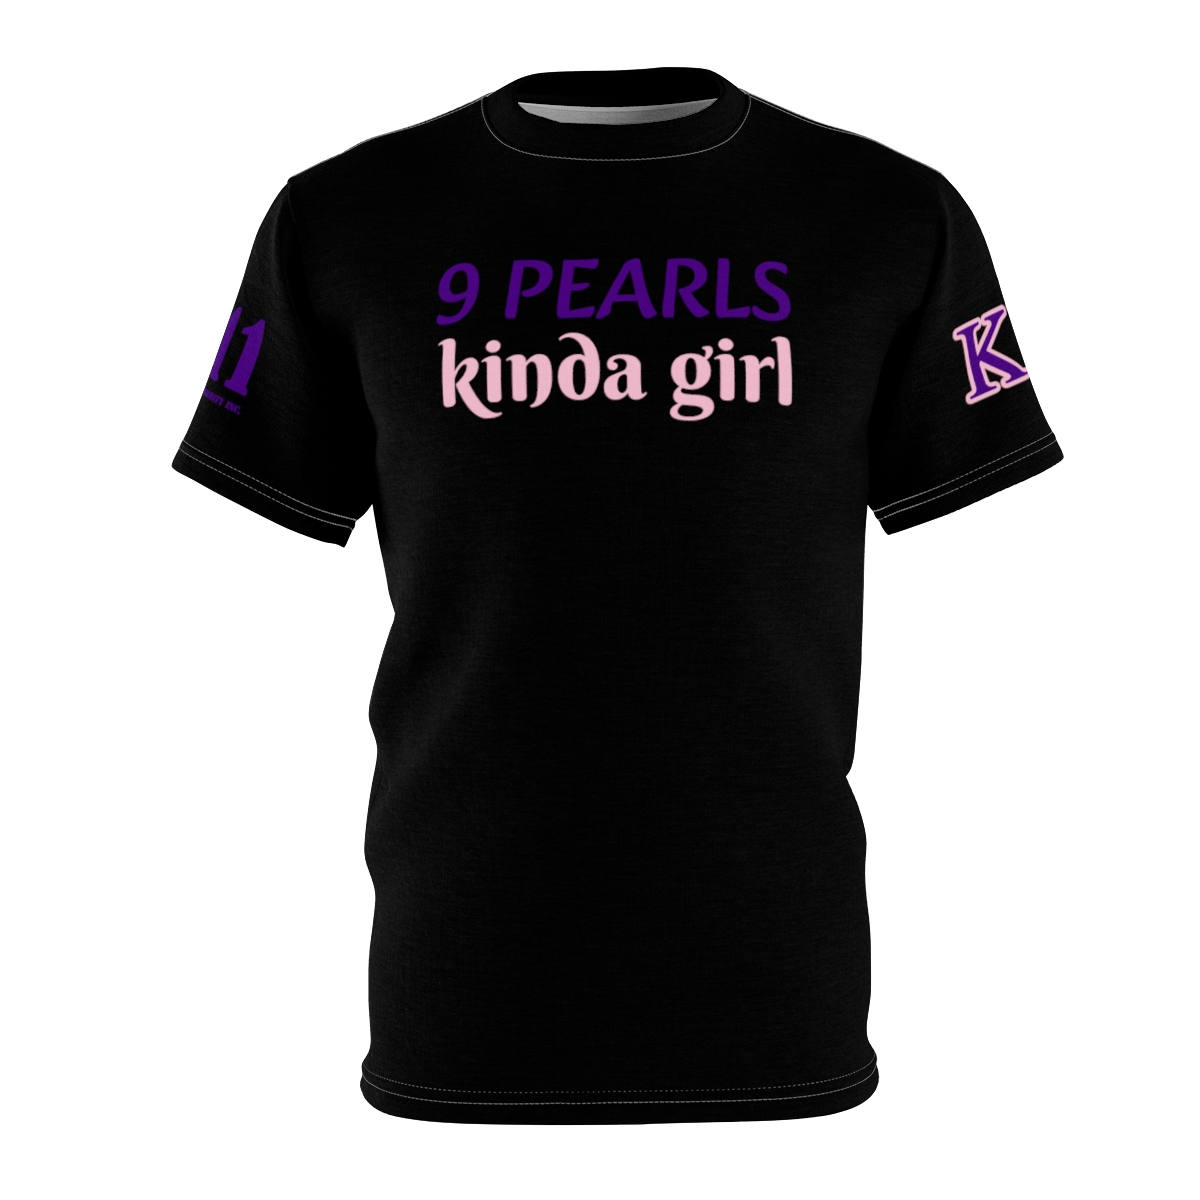 Black t-shirt with a quote 9 pearls kinda girl; text design.